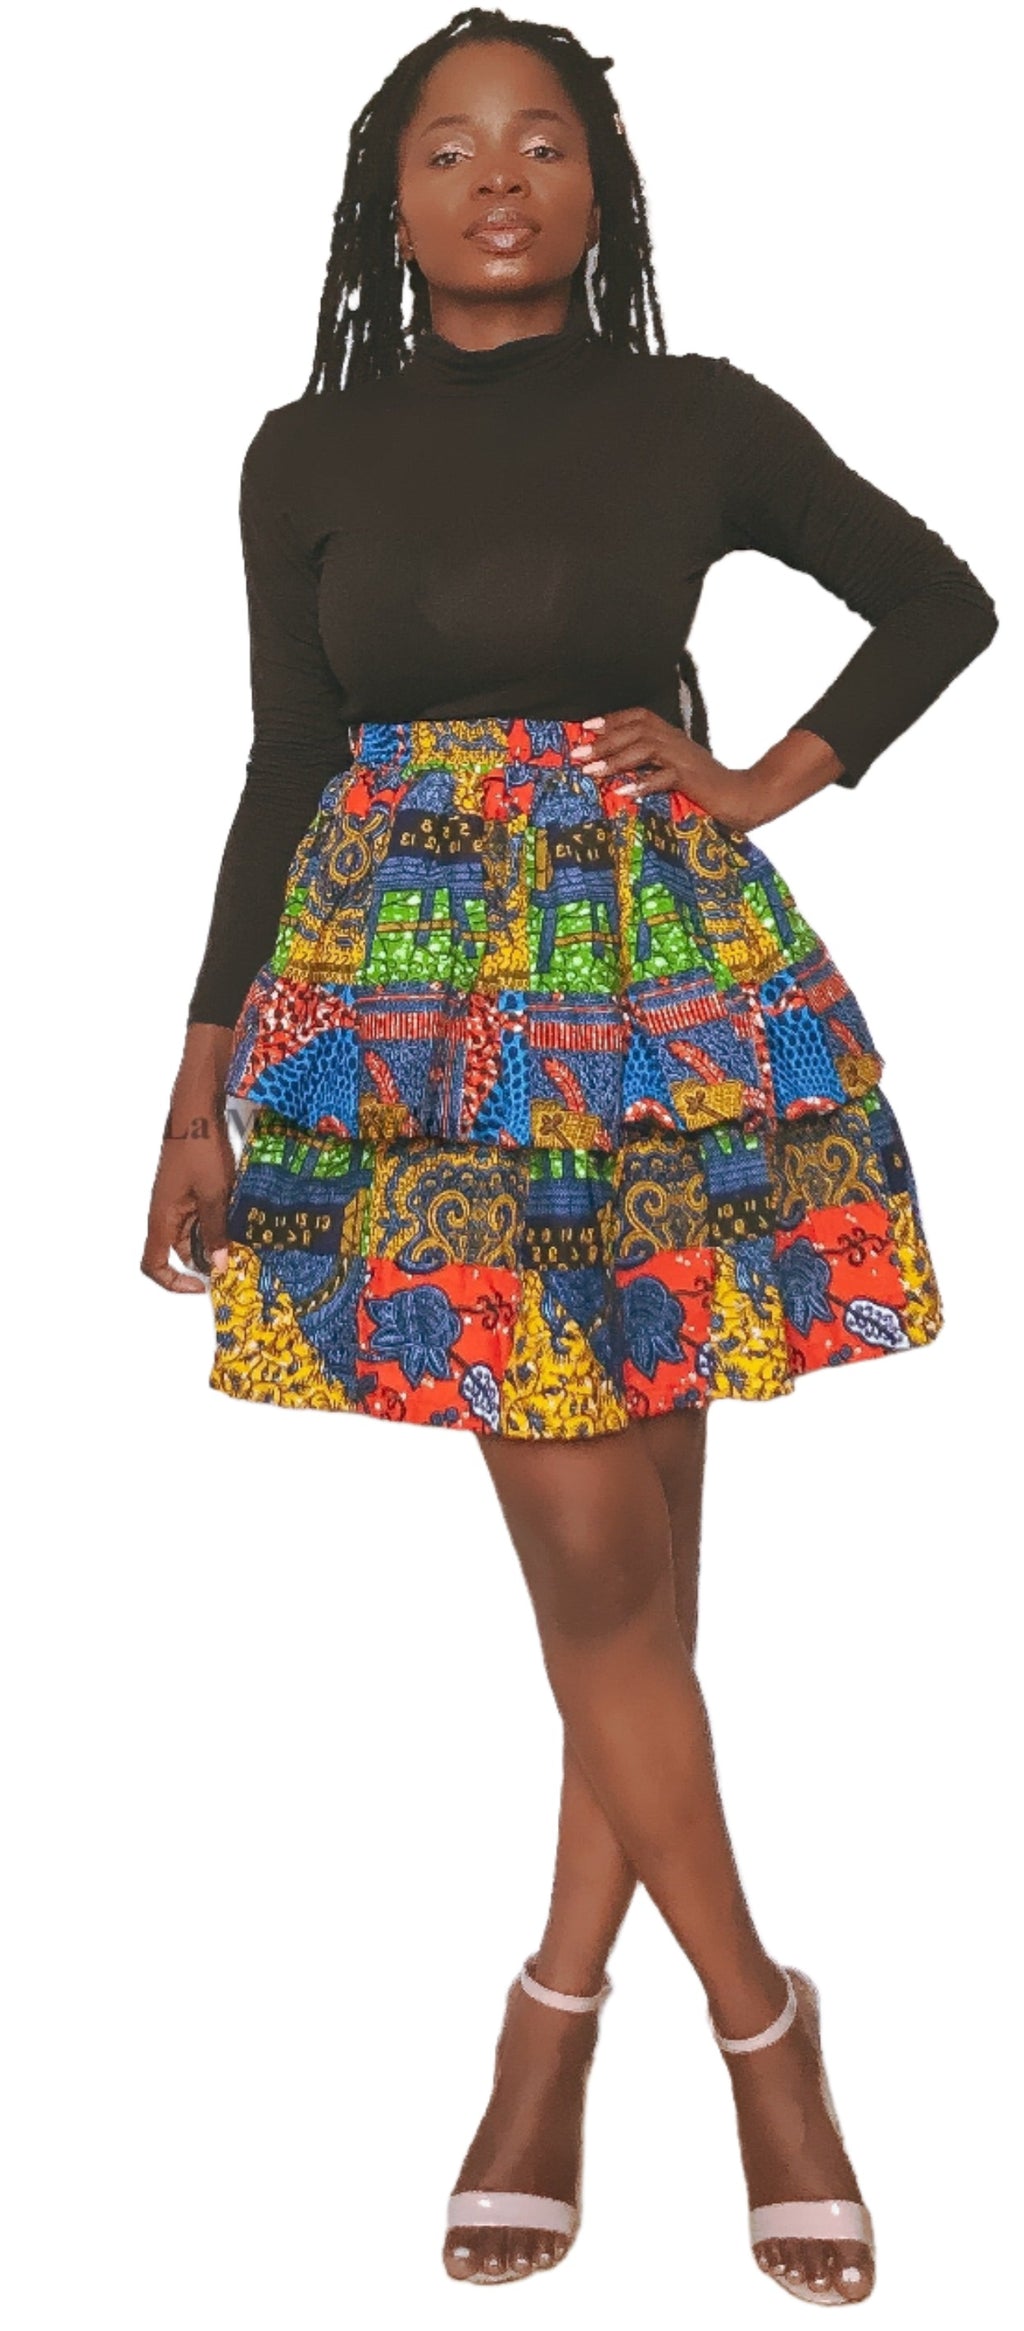 Patchy double layer skirt - NANA